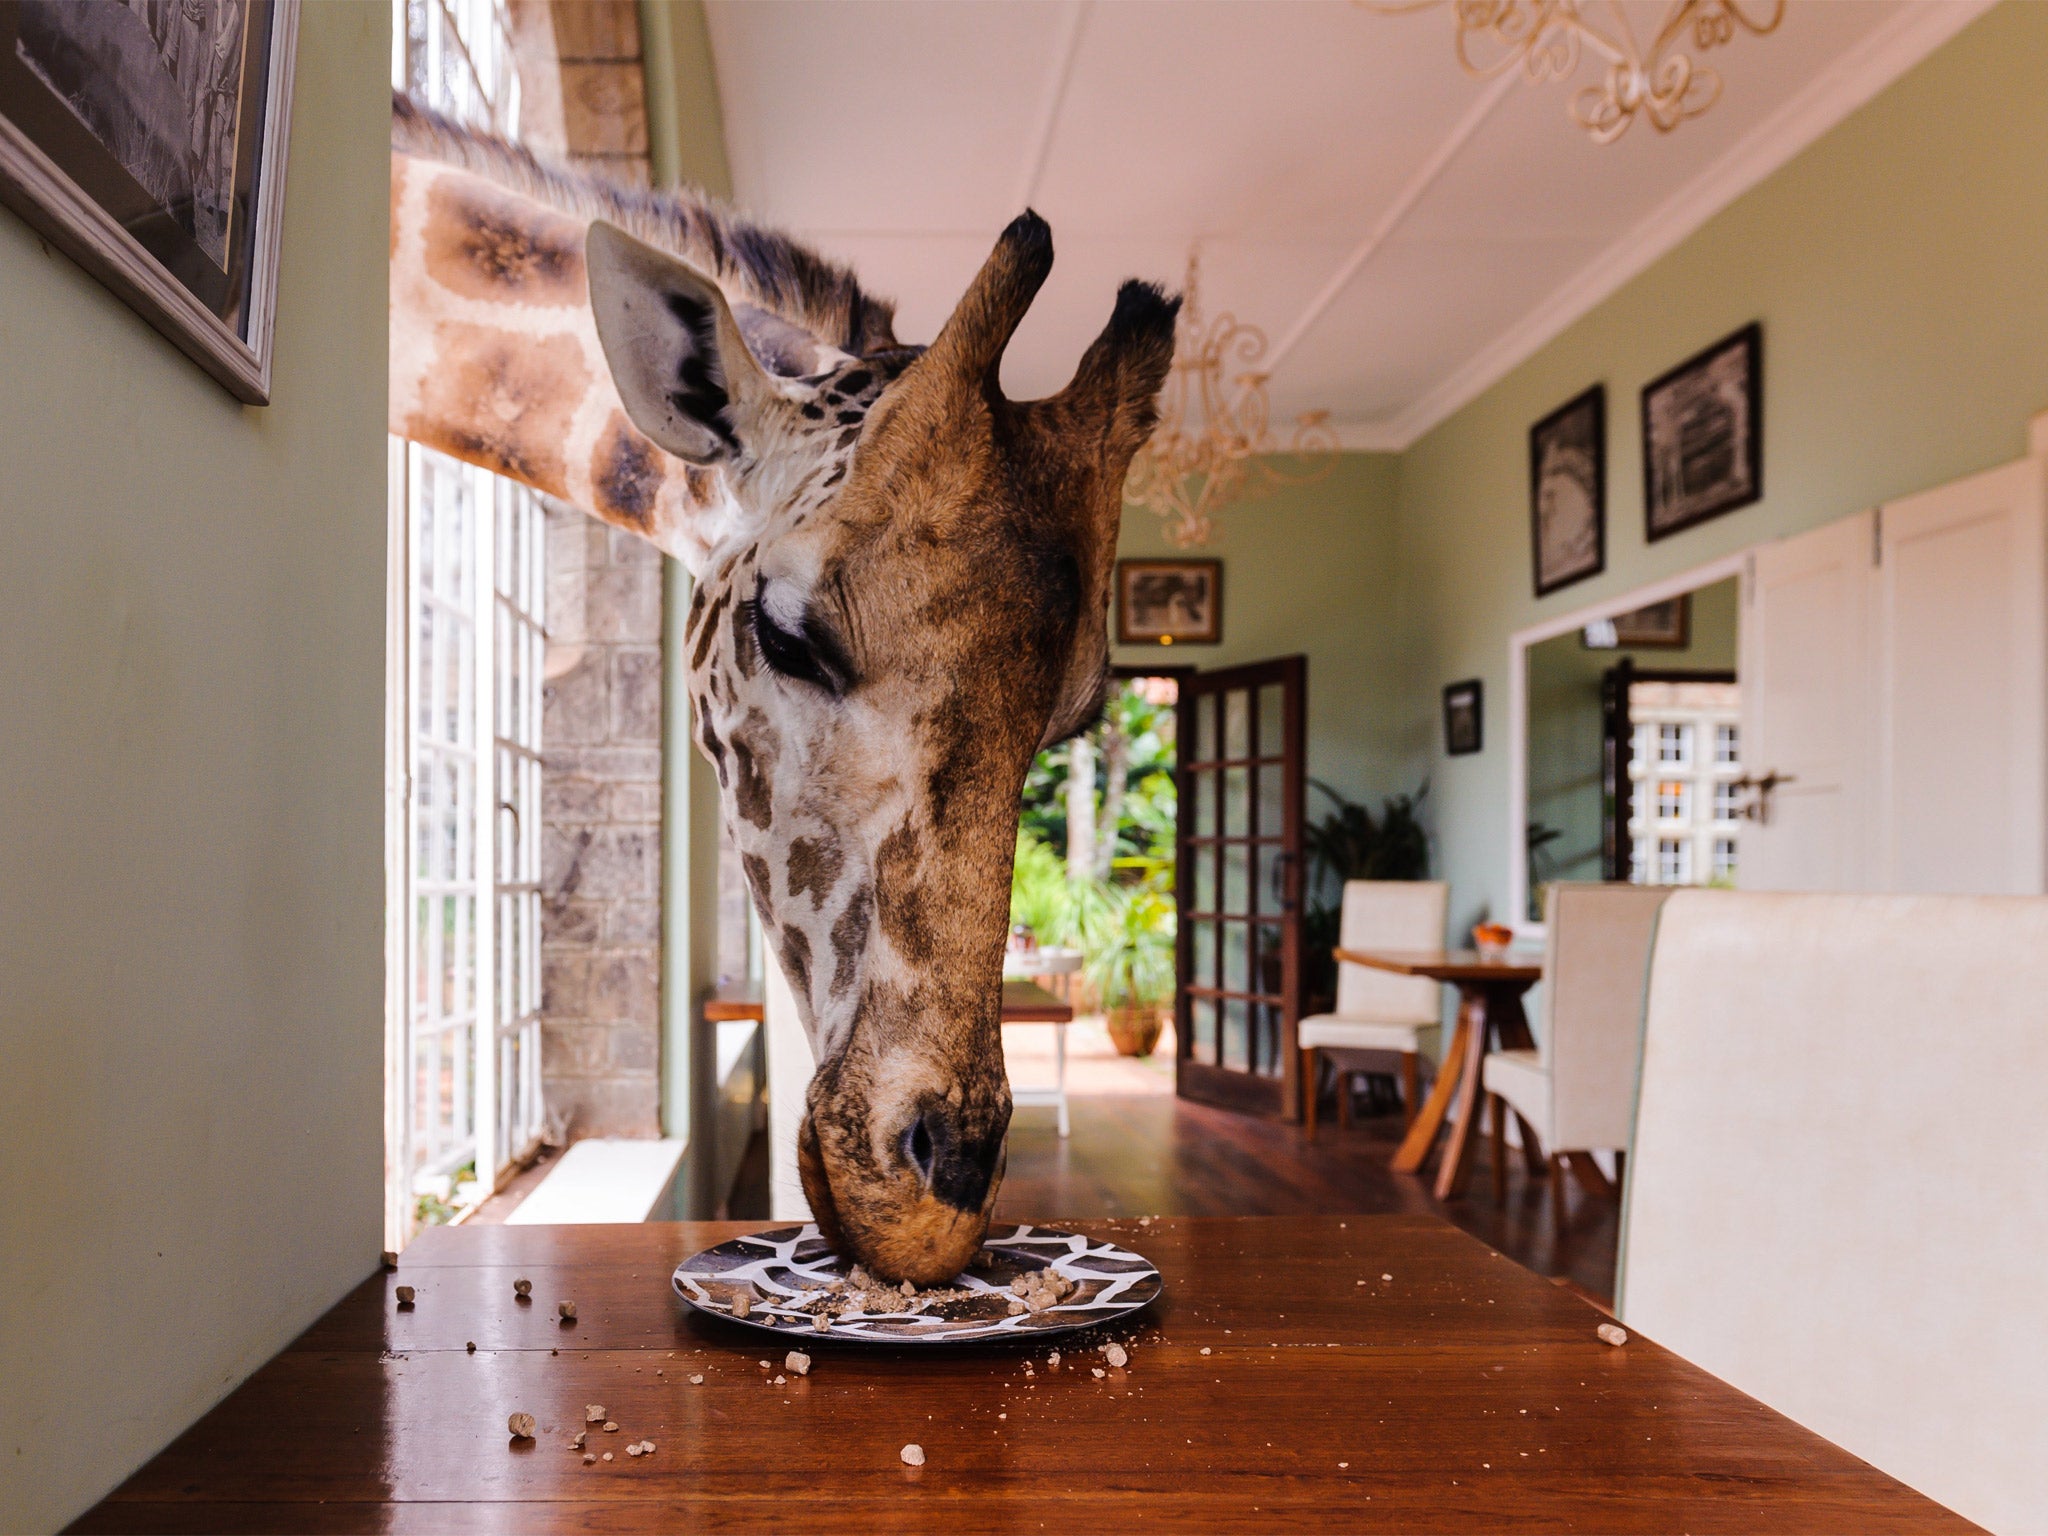 Don't Leave Any Food On Your Plate: The giraffes at Nairobi's Giraffe Manor are totally at home with humans. They will eat out of your hand, or even off your plate.
Location: Giraffe Manor, Nairobi, Kenya